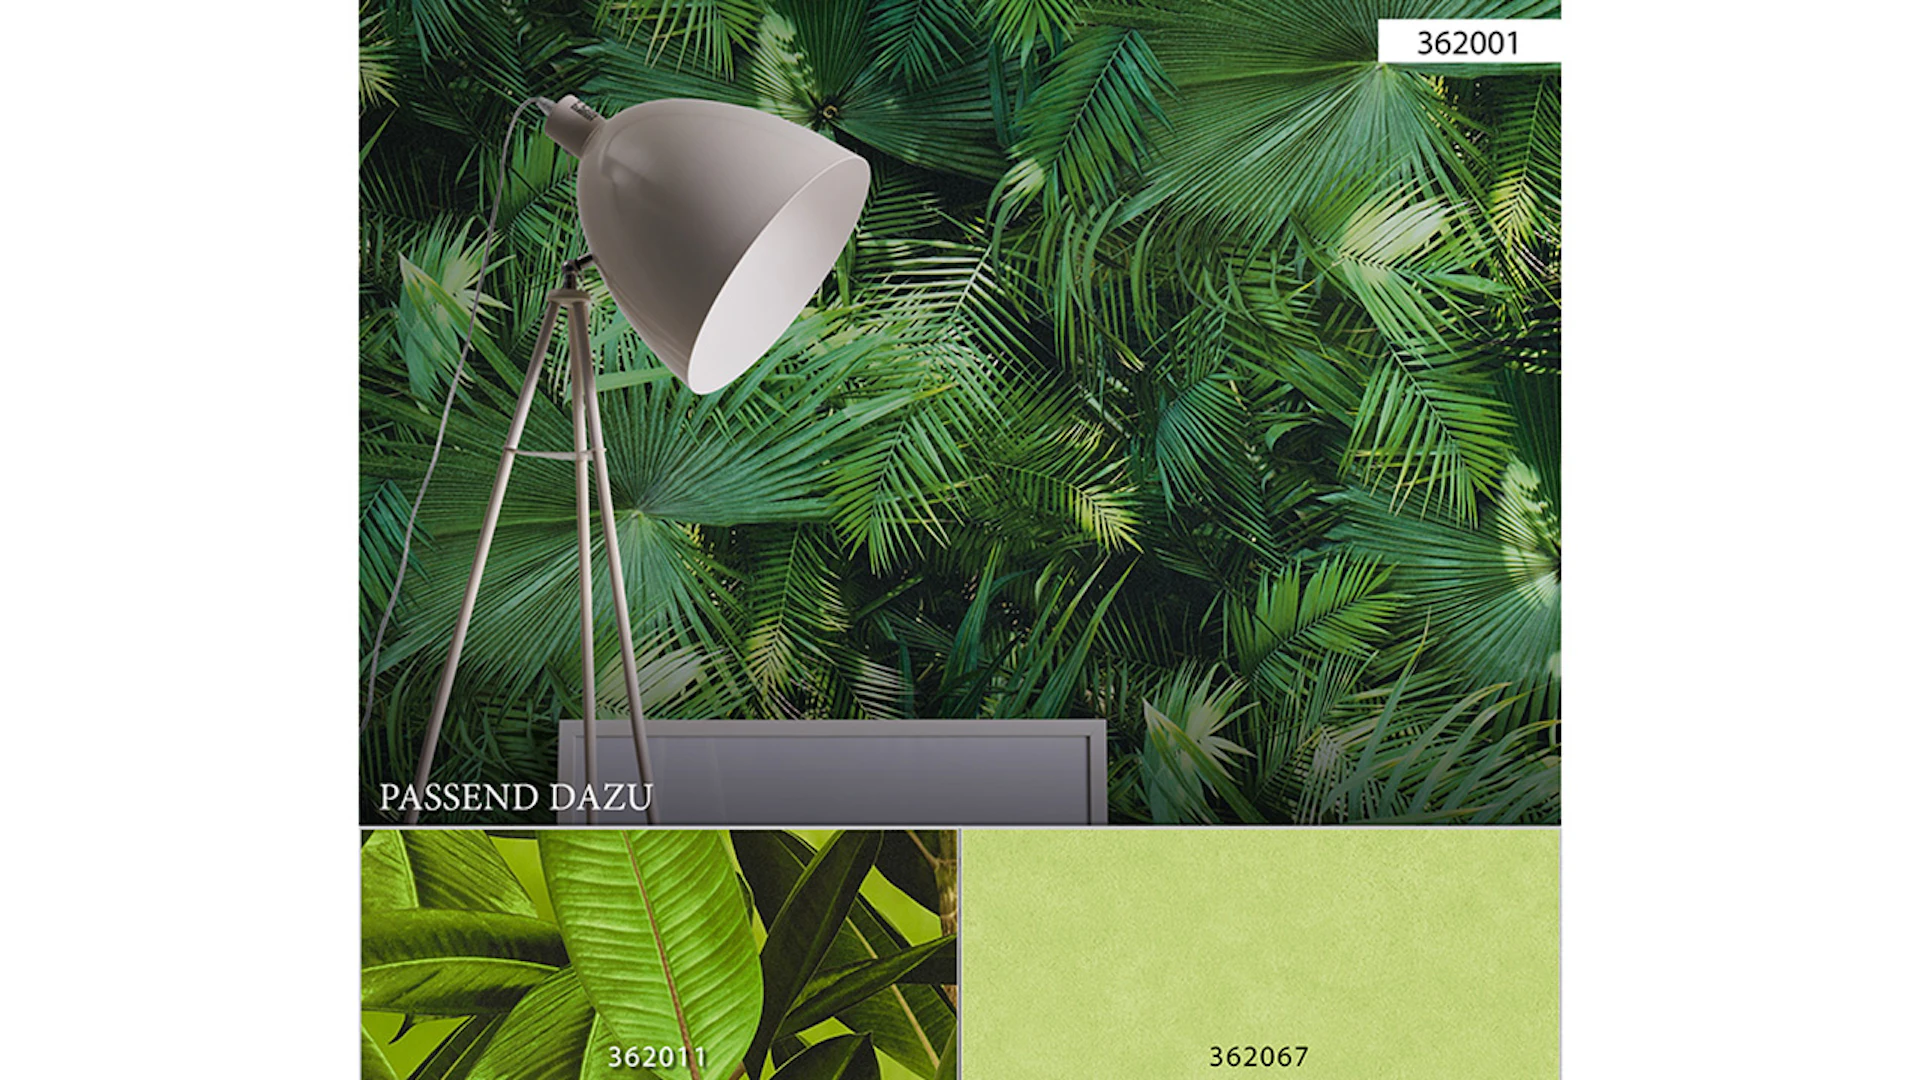 Vinyl wallpaper New Booth 2.0 A.S. Création Modern Palm Leaves Green Black 001